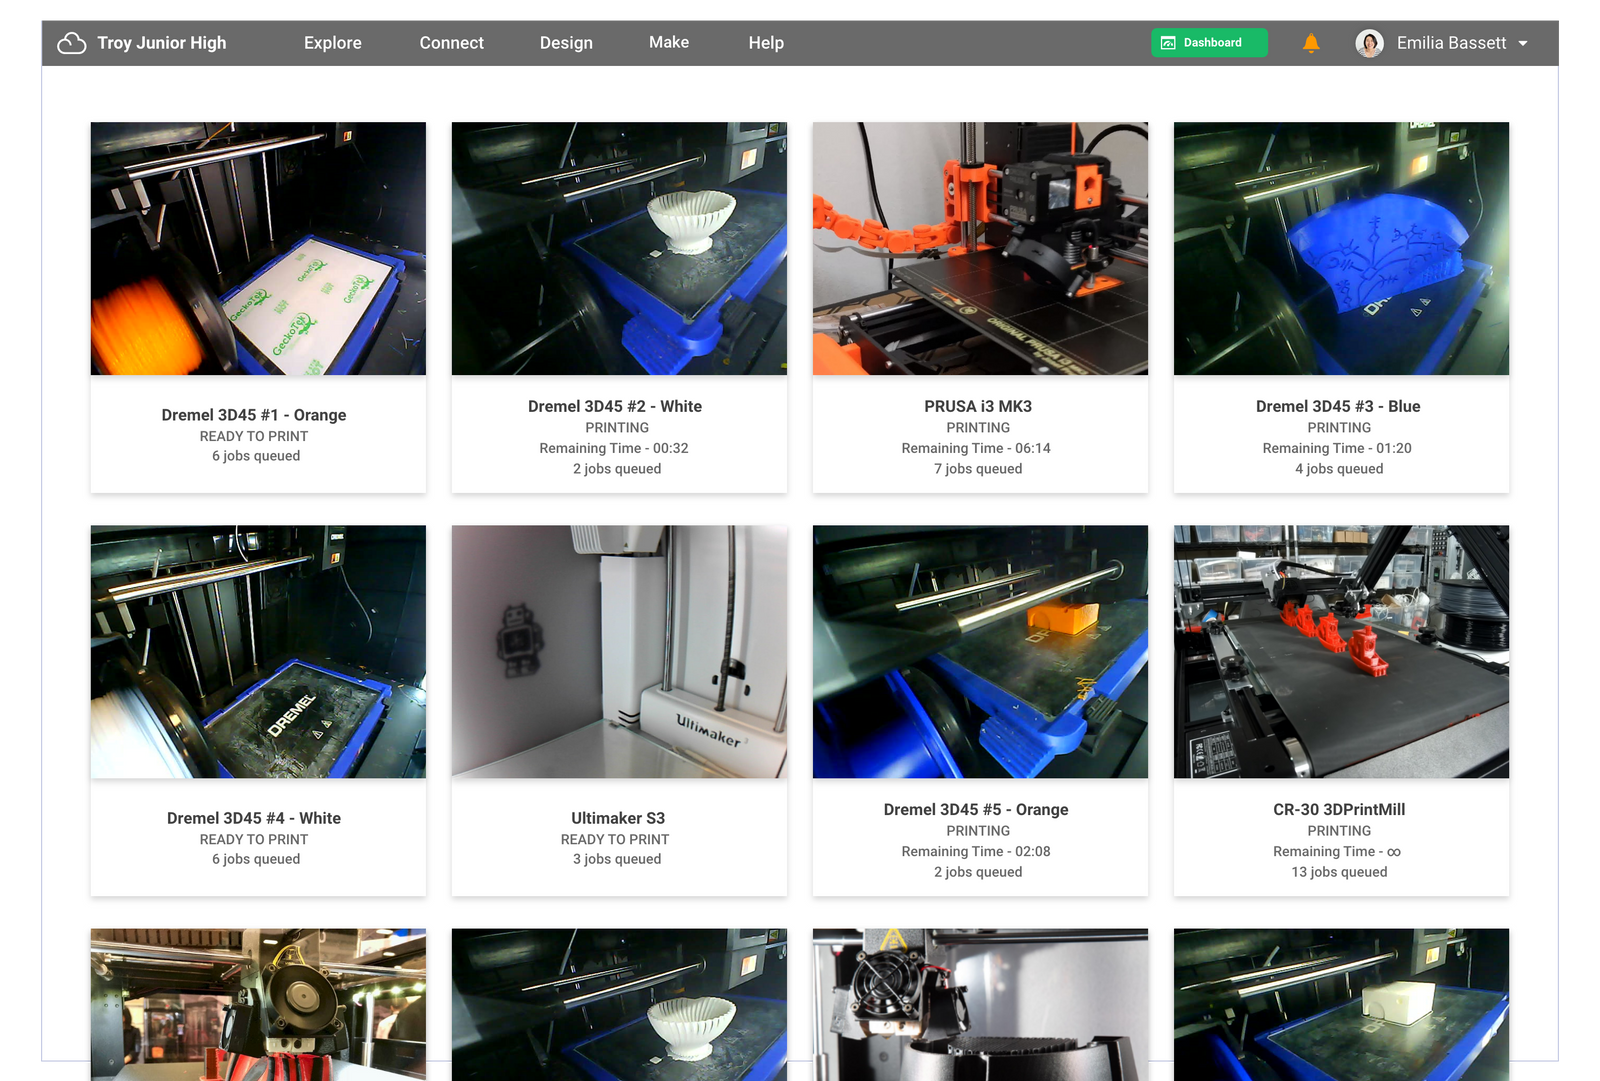 Introducing Polar3D Cloud, the #1 Cloud-Based 3D Printing Platform in the World